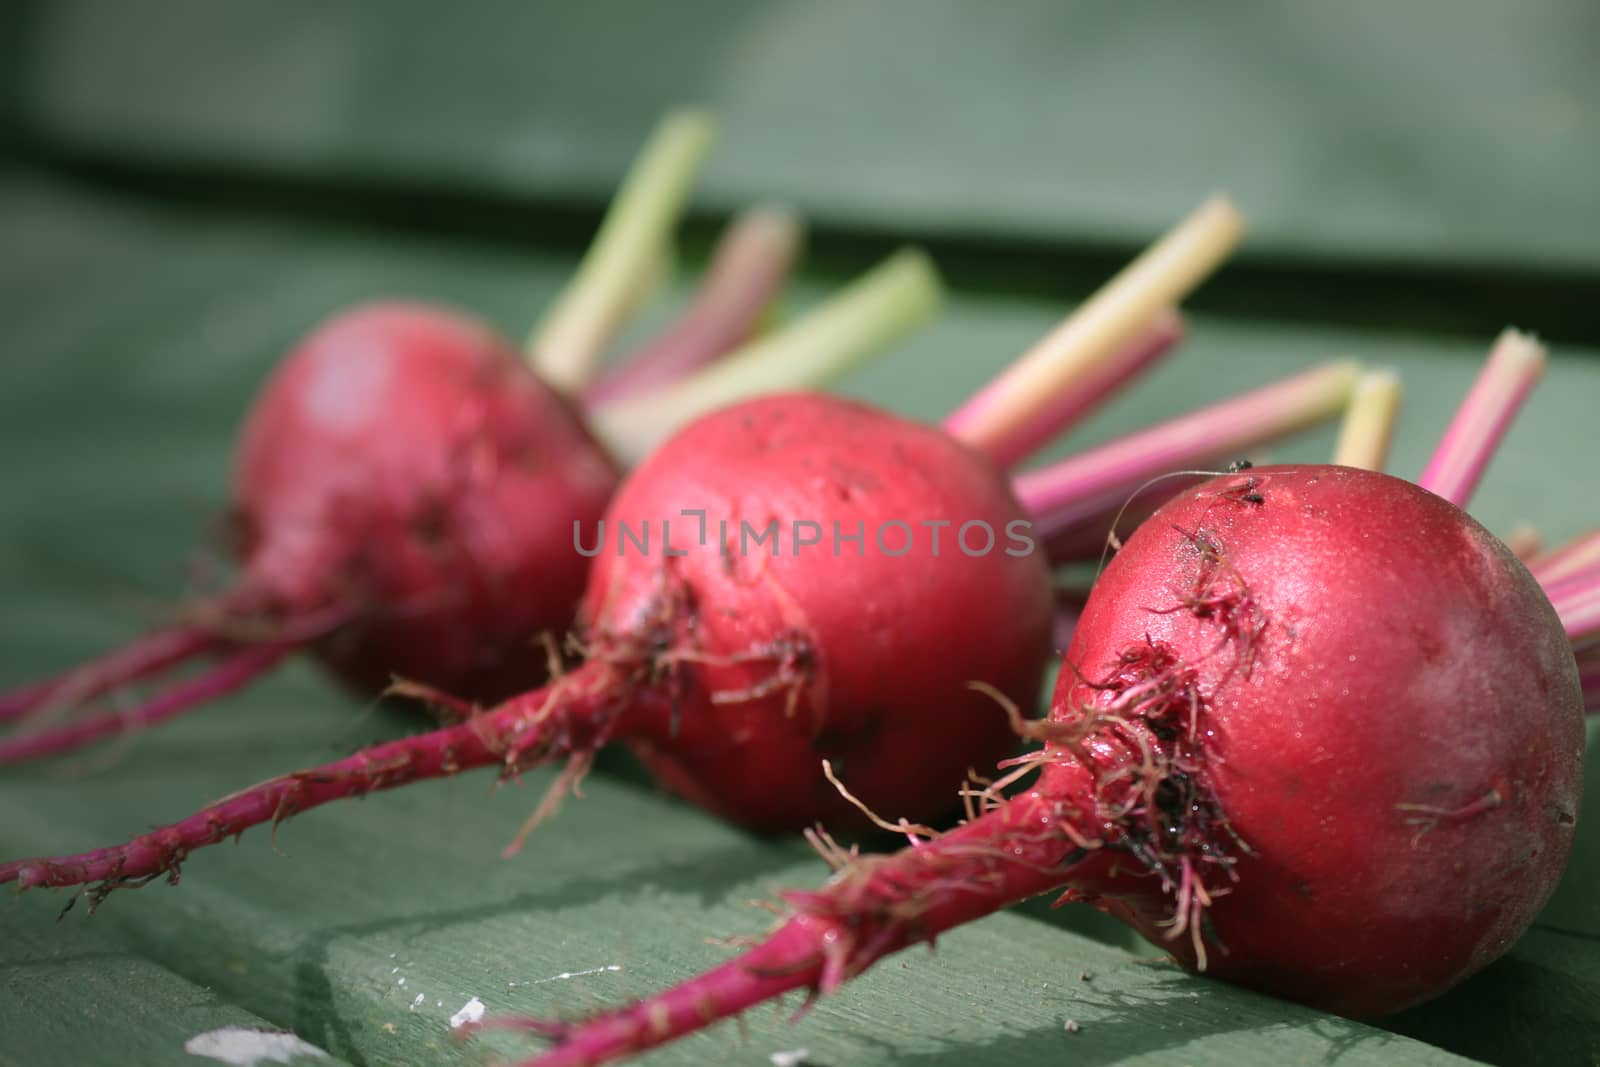 Three freshly picked beetroots, Chioggia, an Italian heirloom variety, with remains of stems attached. Set on a rustic green wooden garden bench base on a landscape format.